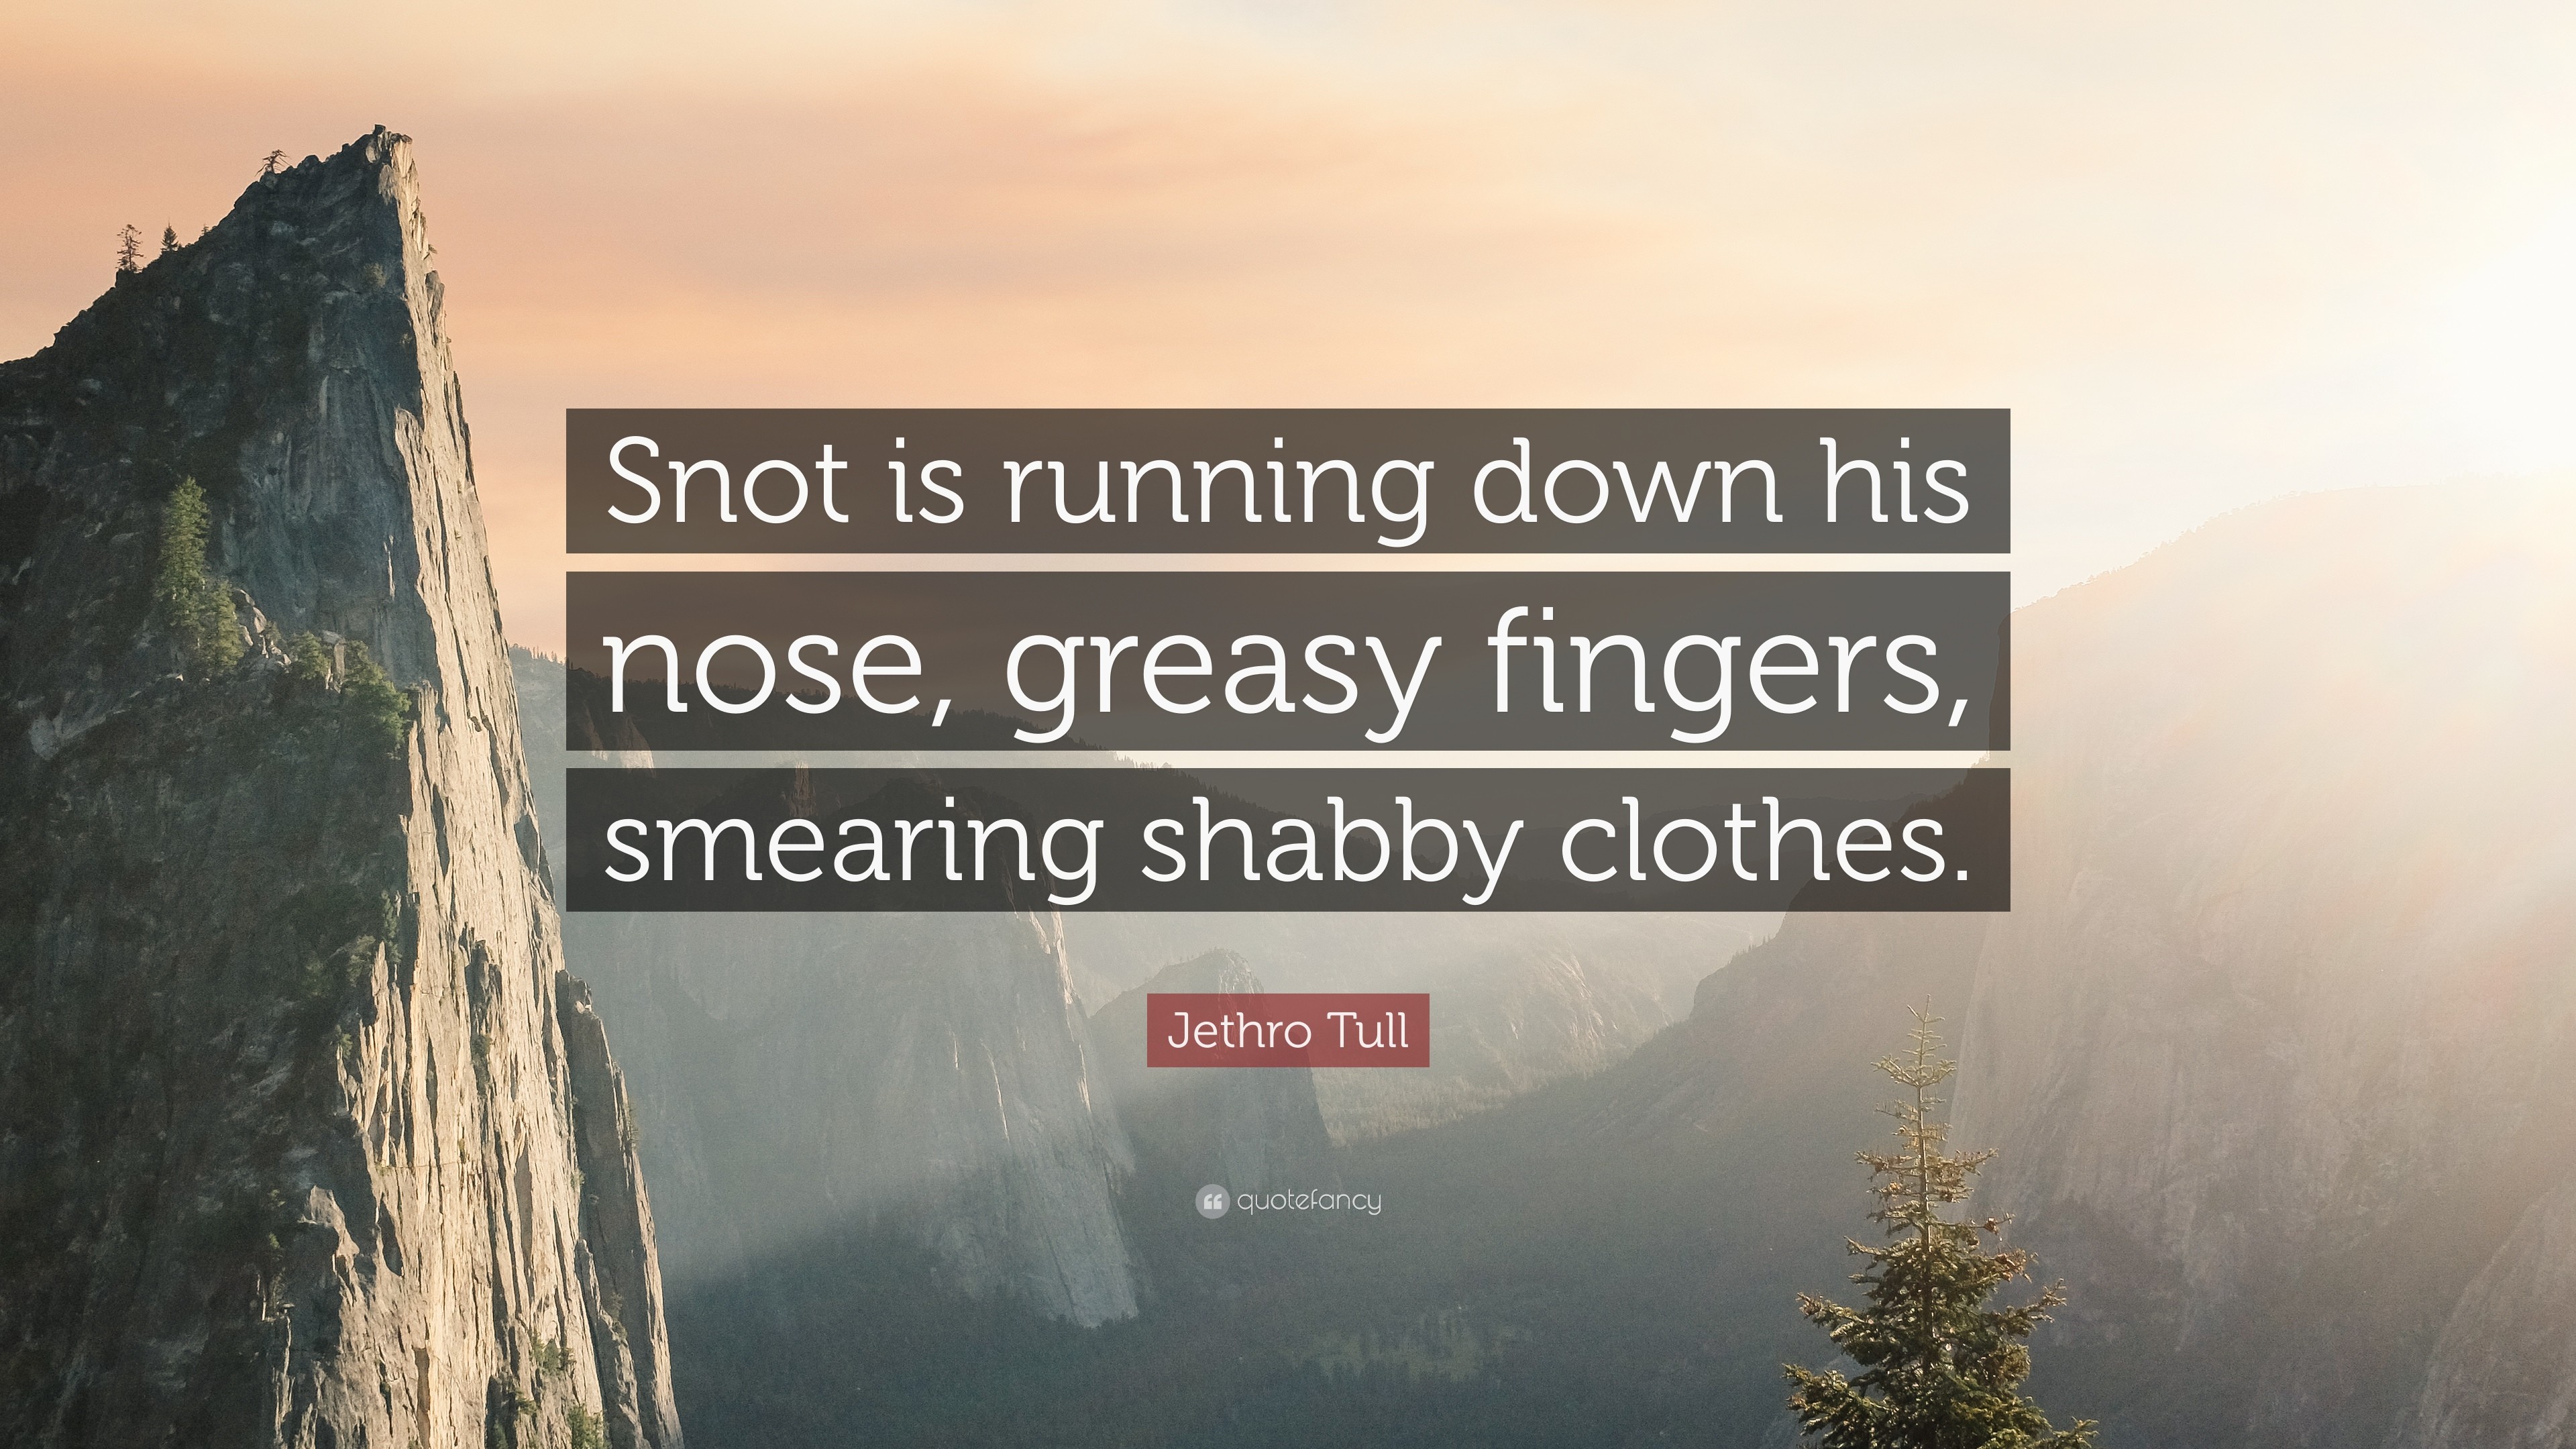 3840x2160 Jethro Tull Quote: “Snot is running down his nose, greasy fingers, smearing